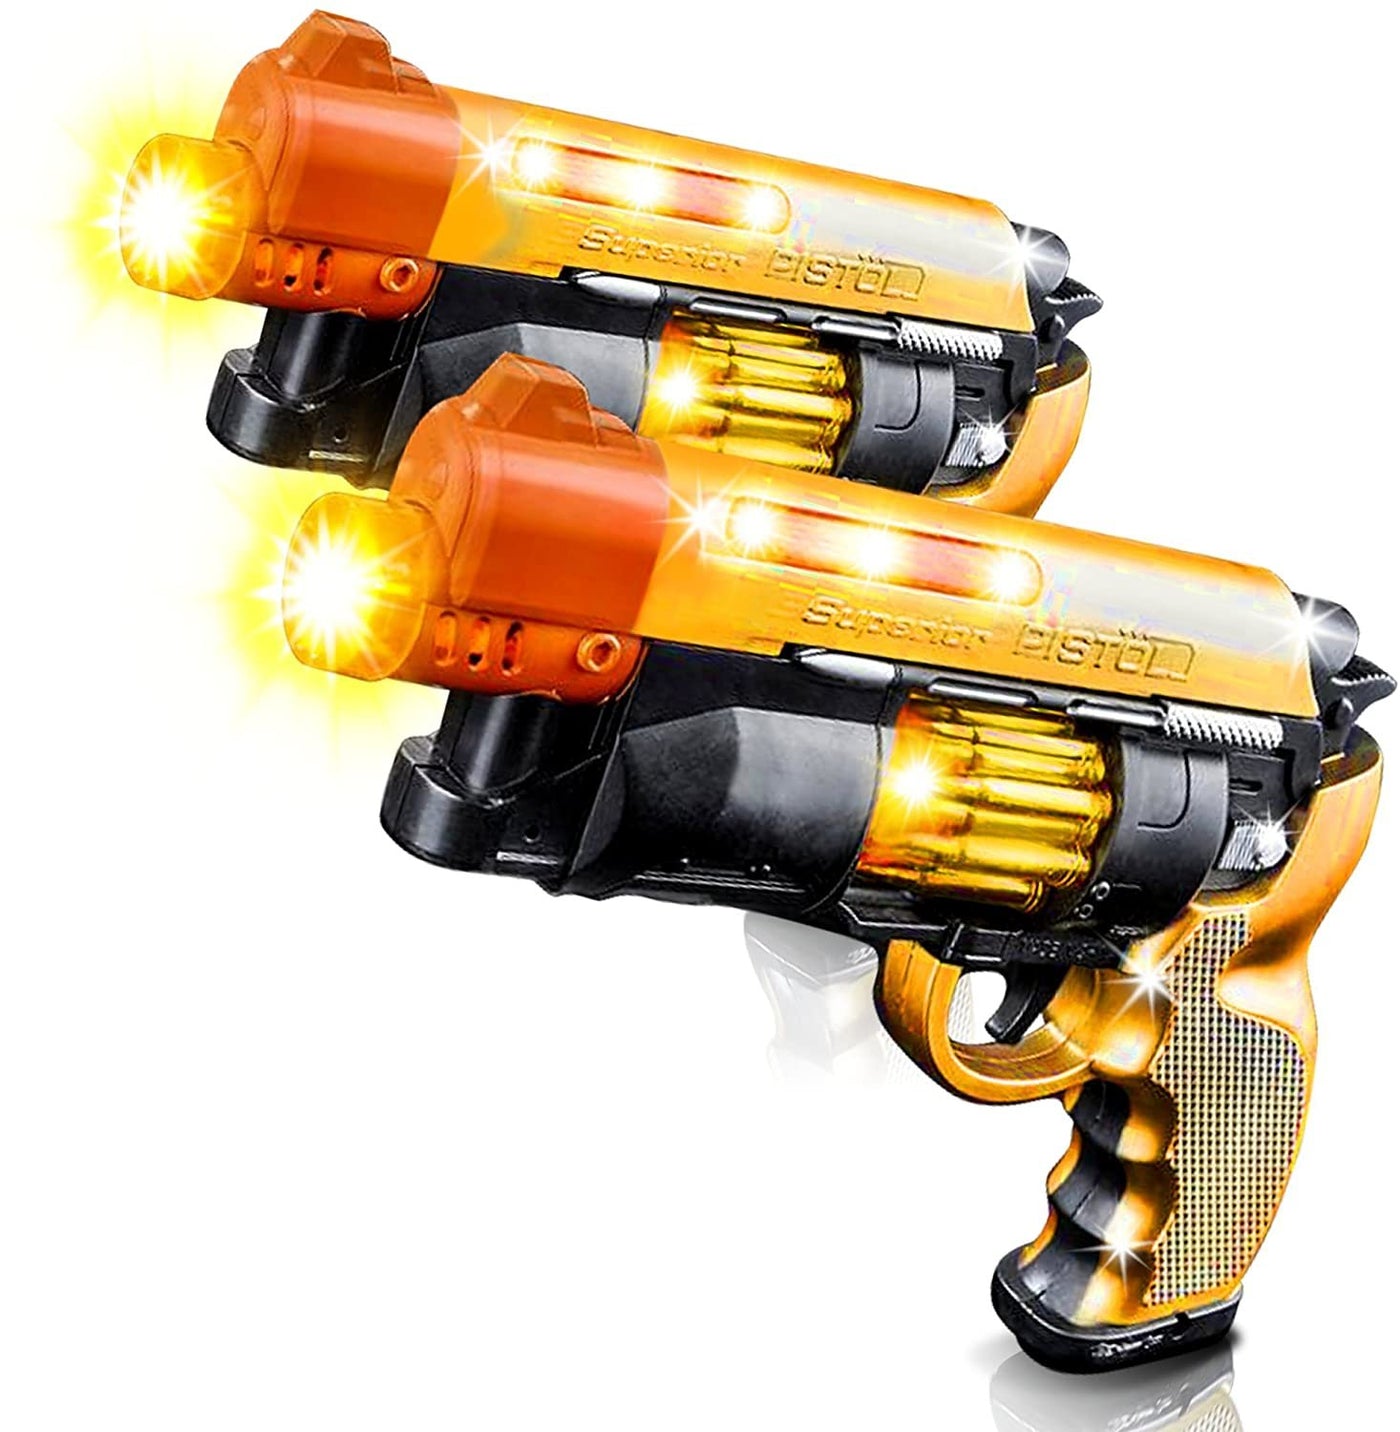 Blade Runner Toy Pistol by Toy Gun for Kids with LED and Sound Effects, Design, Batteries Included, Sturdy Plastic Design, Great Gift Idea for Boys & Girls